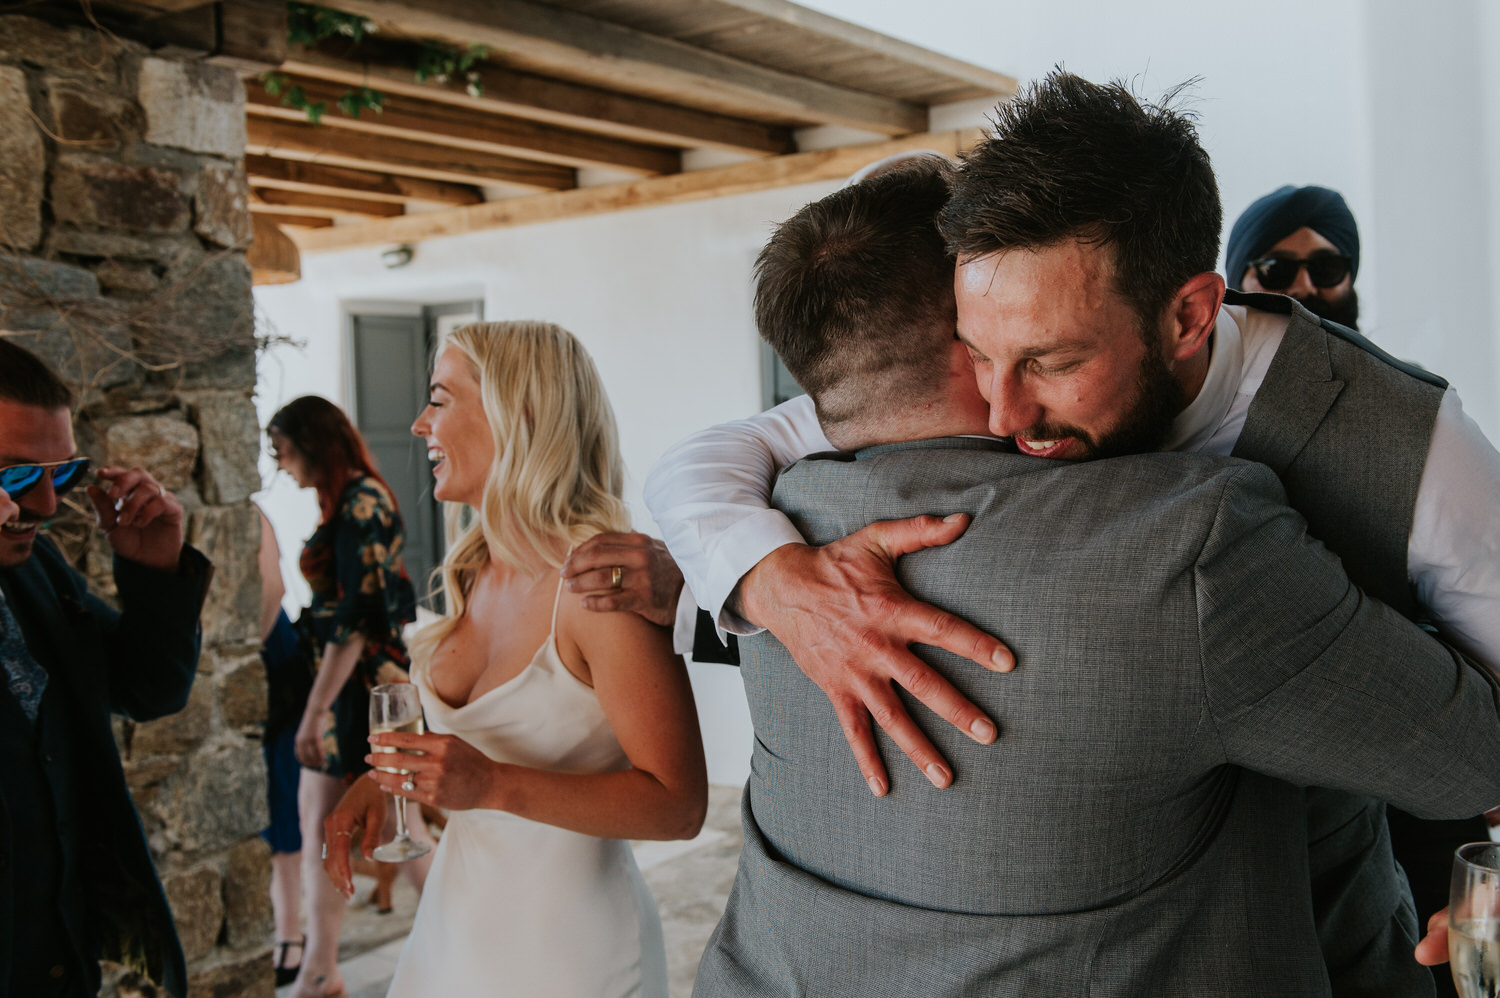 Mykonos wedding photographer: groom hugging his best man with bride next to him and a glass of champagne in her hand.